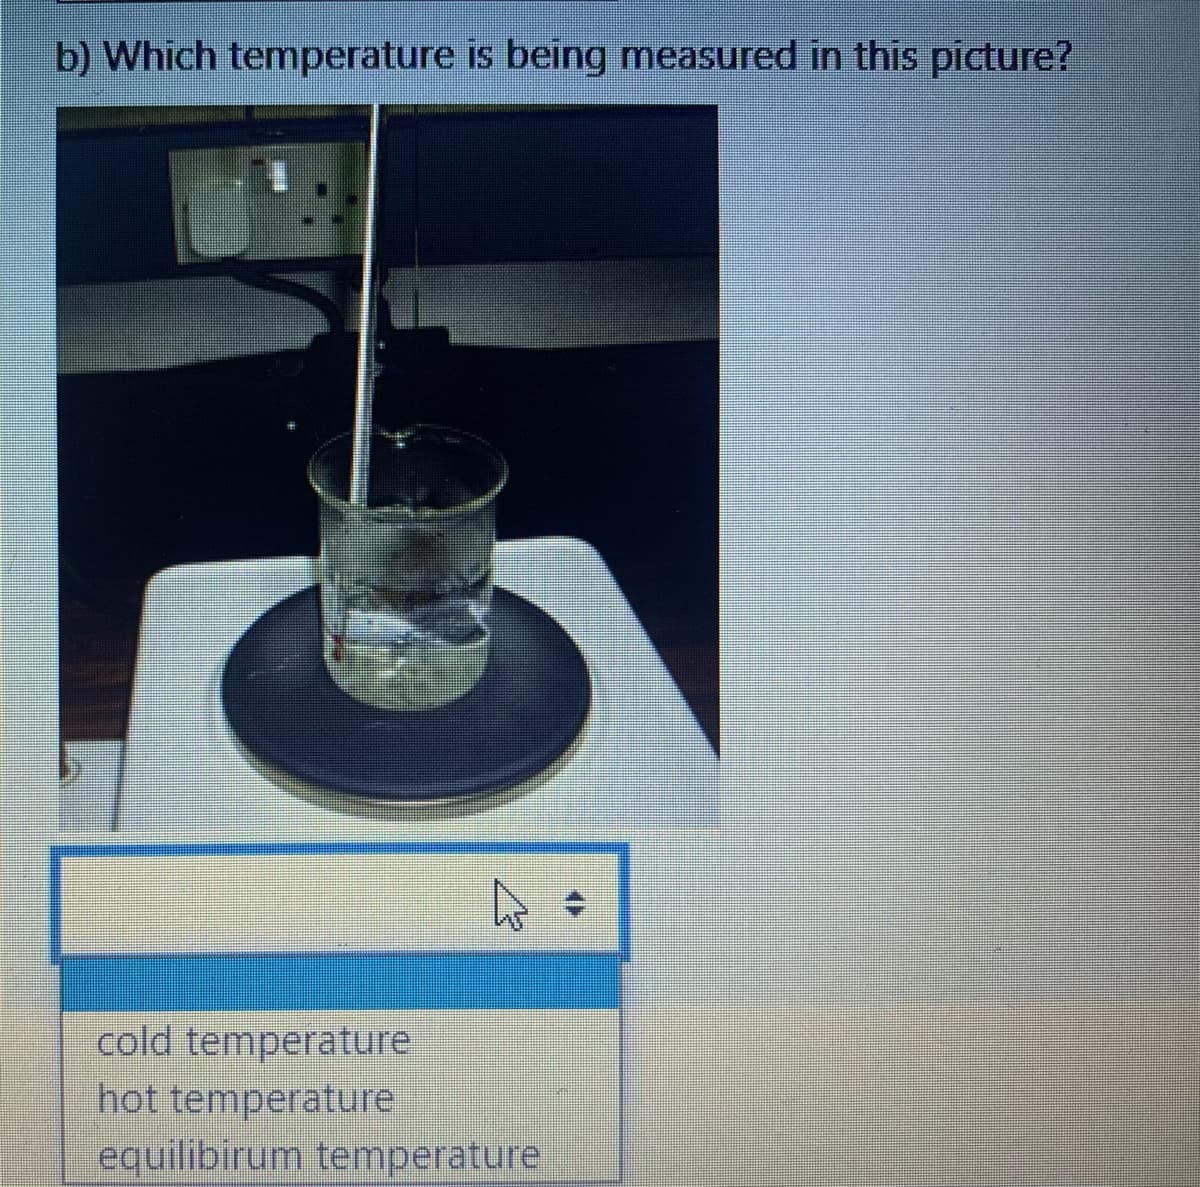 b) Which temperature is being measured in this picture?
cold temperature
hot temperature
equilibirum temperature
